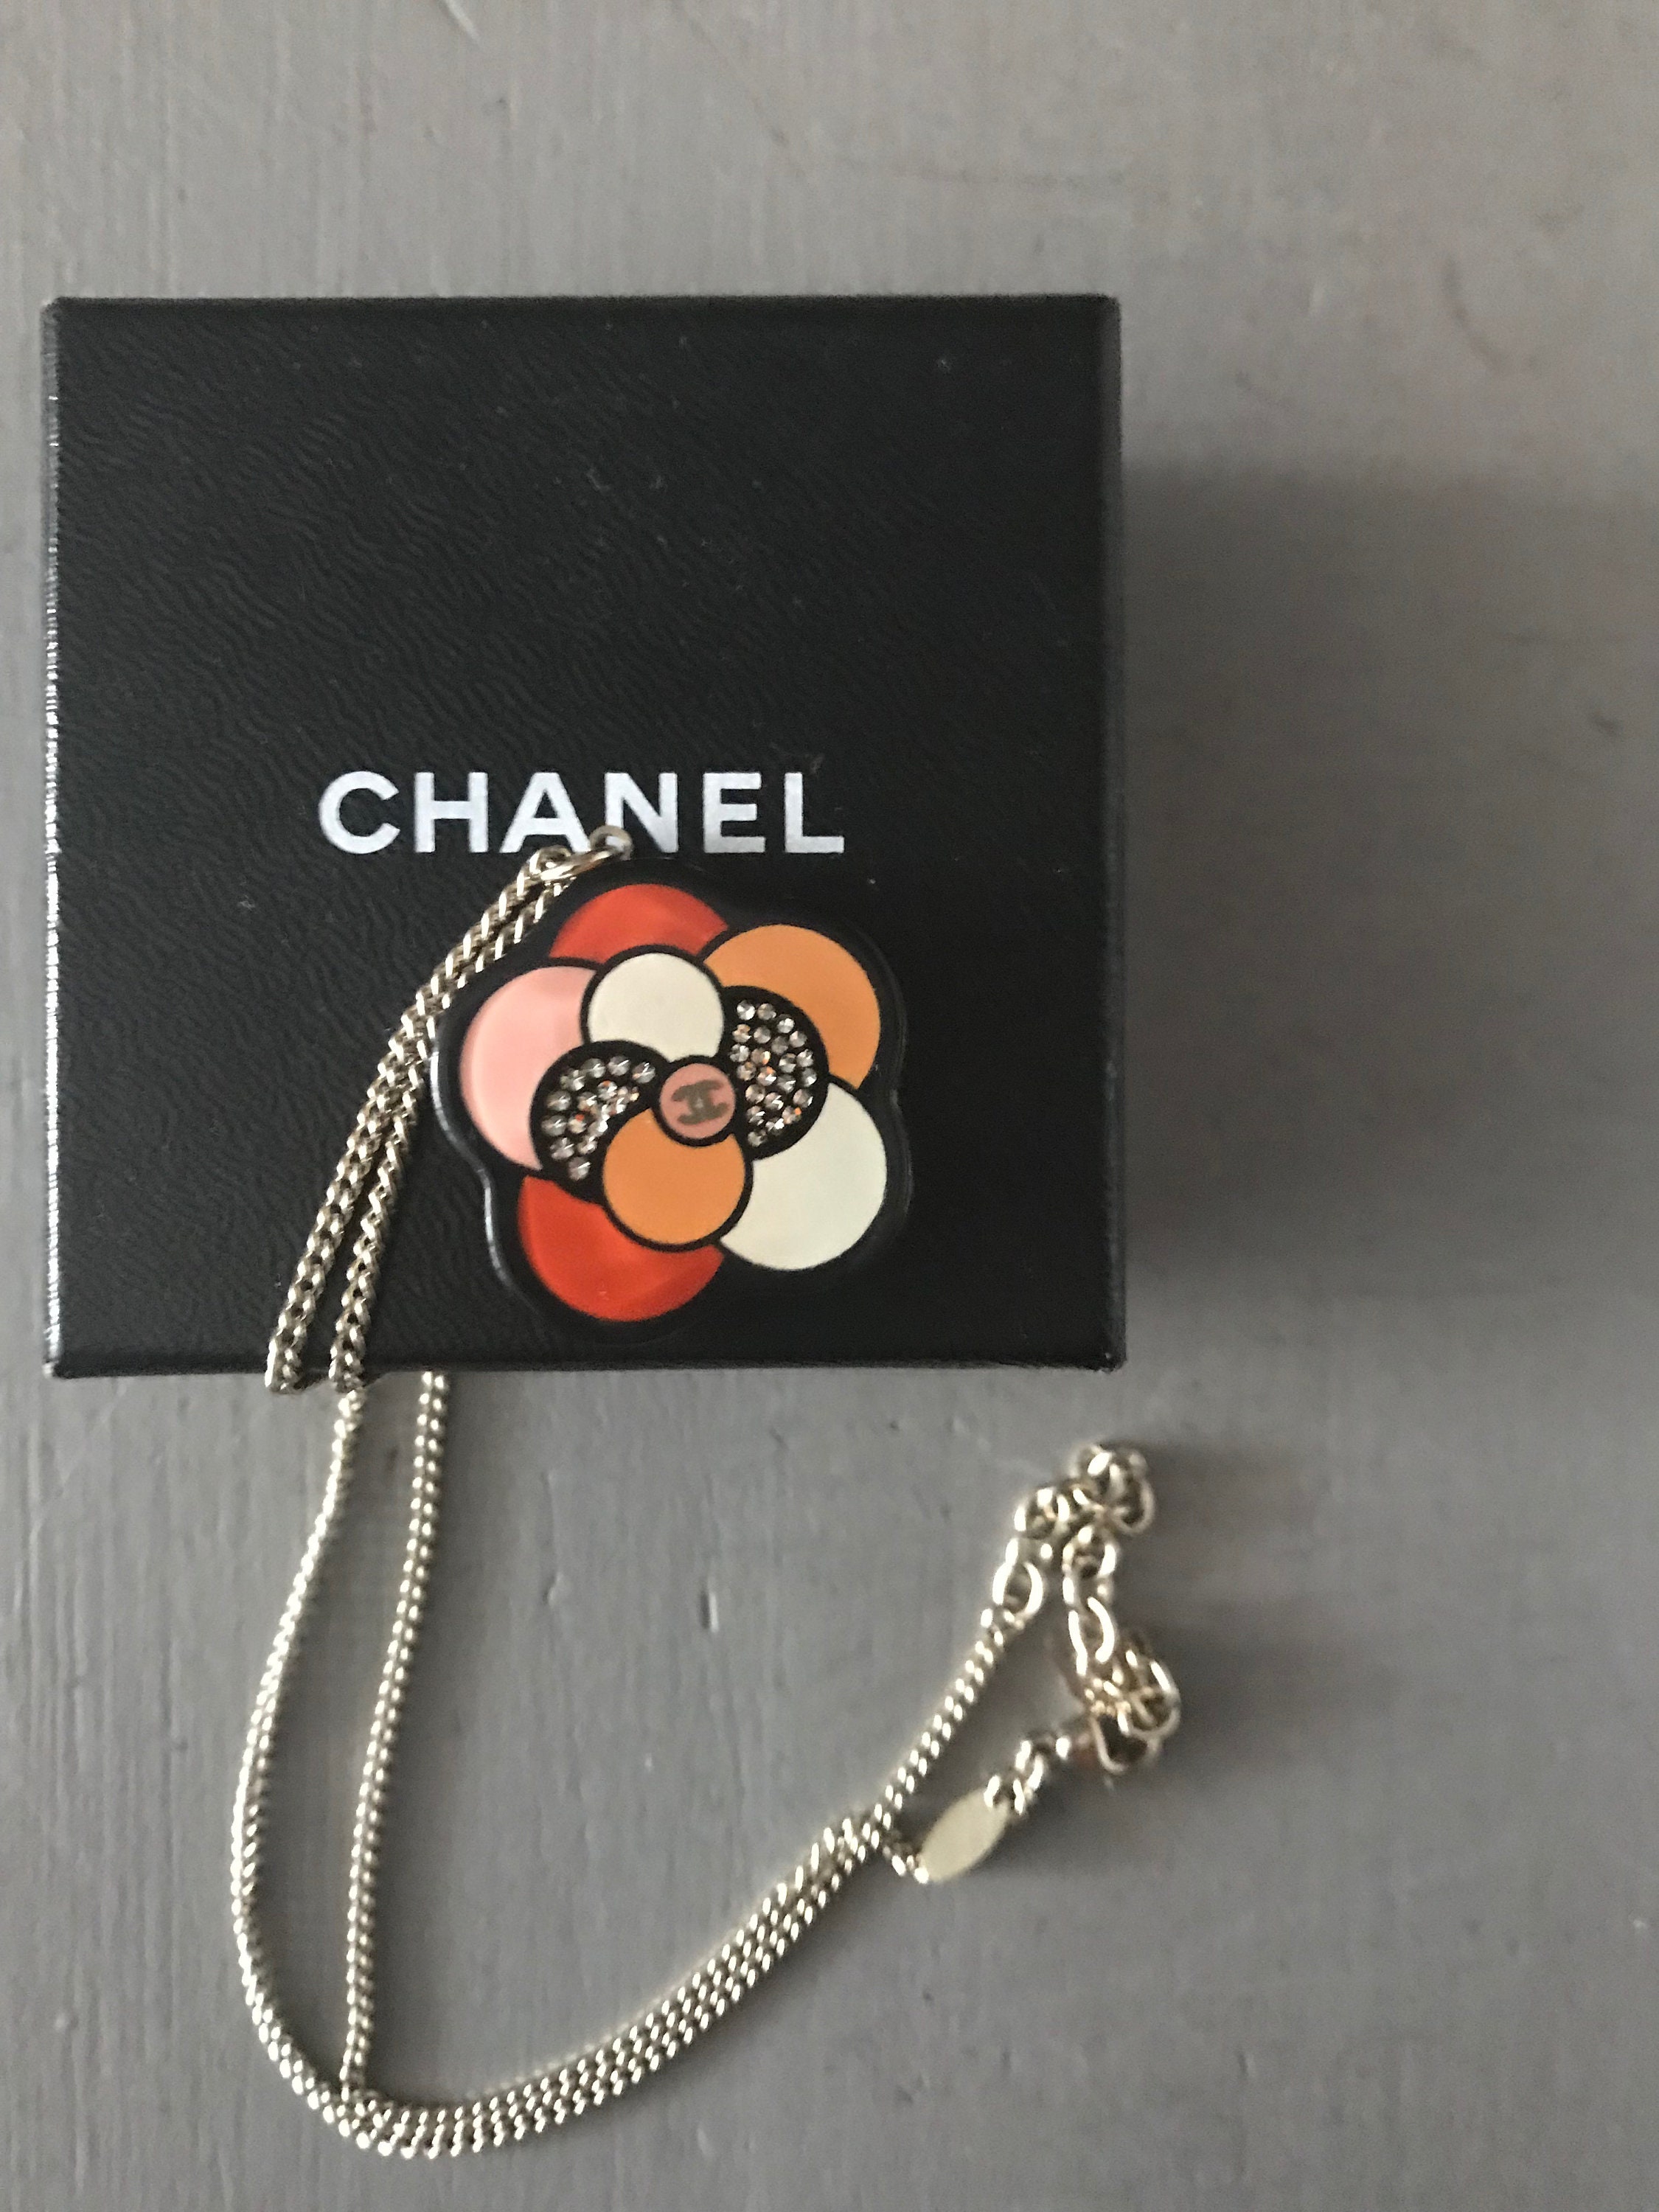 Chanel Button Jewelry -  UK